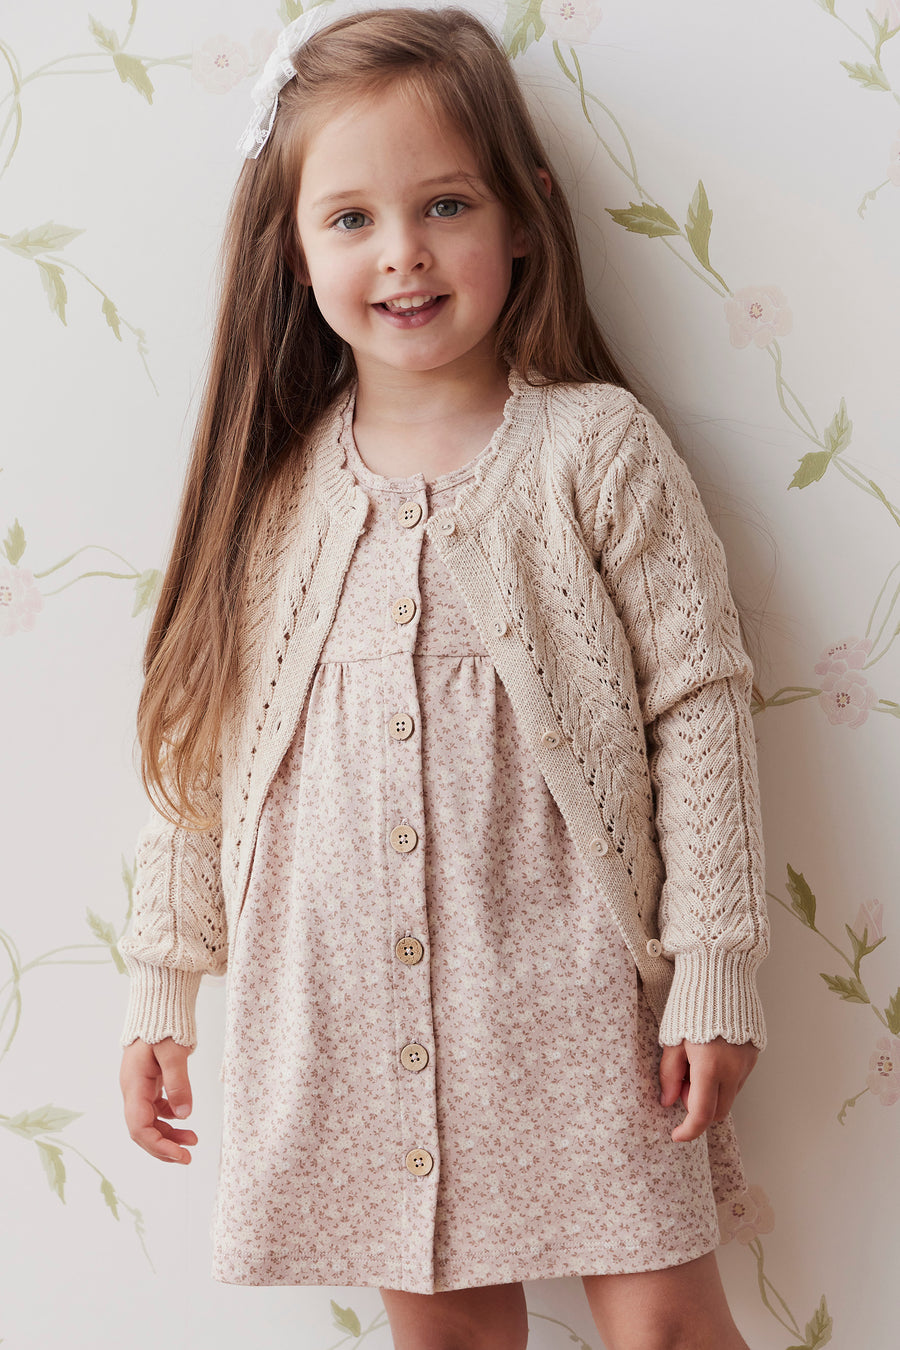 Hannah Knitted Cardigan - Light Oatmeal Marle Childrens Cardigan from Jamie Kay NZ